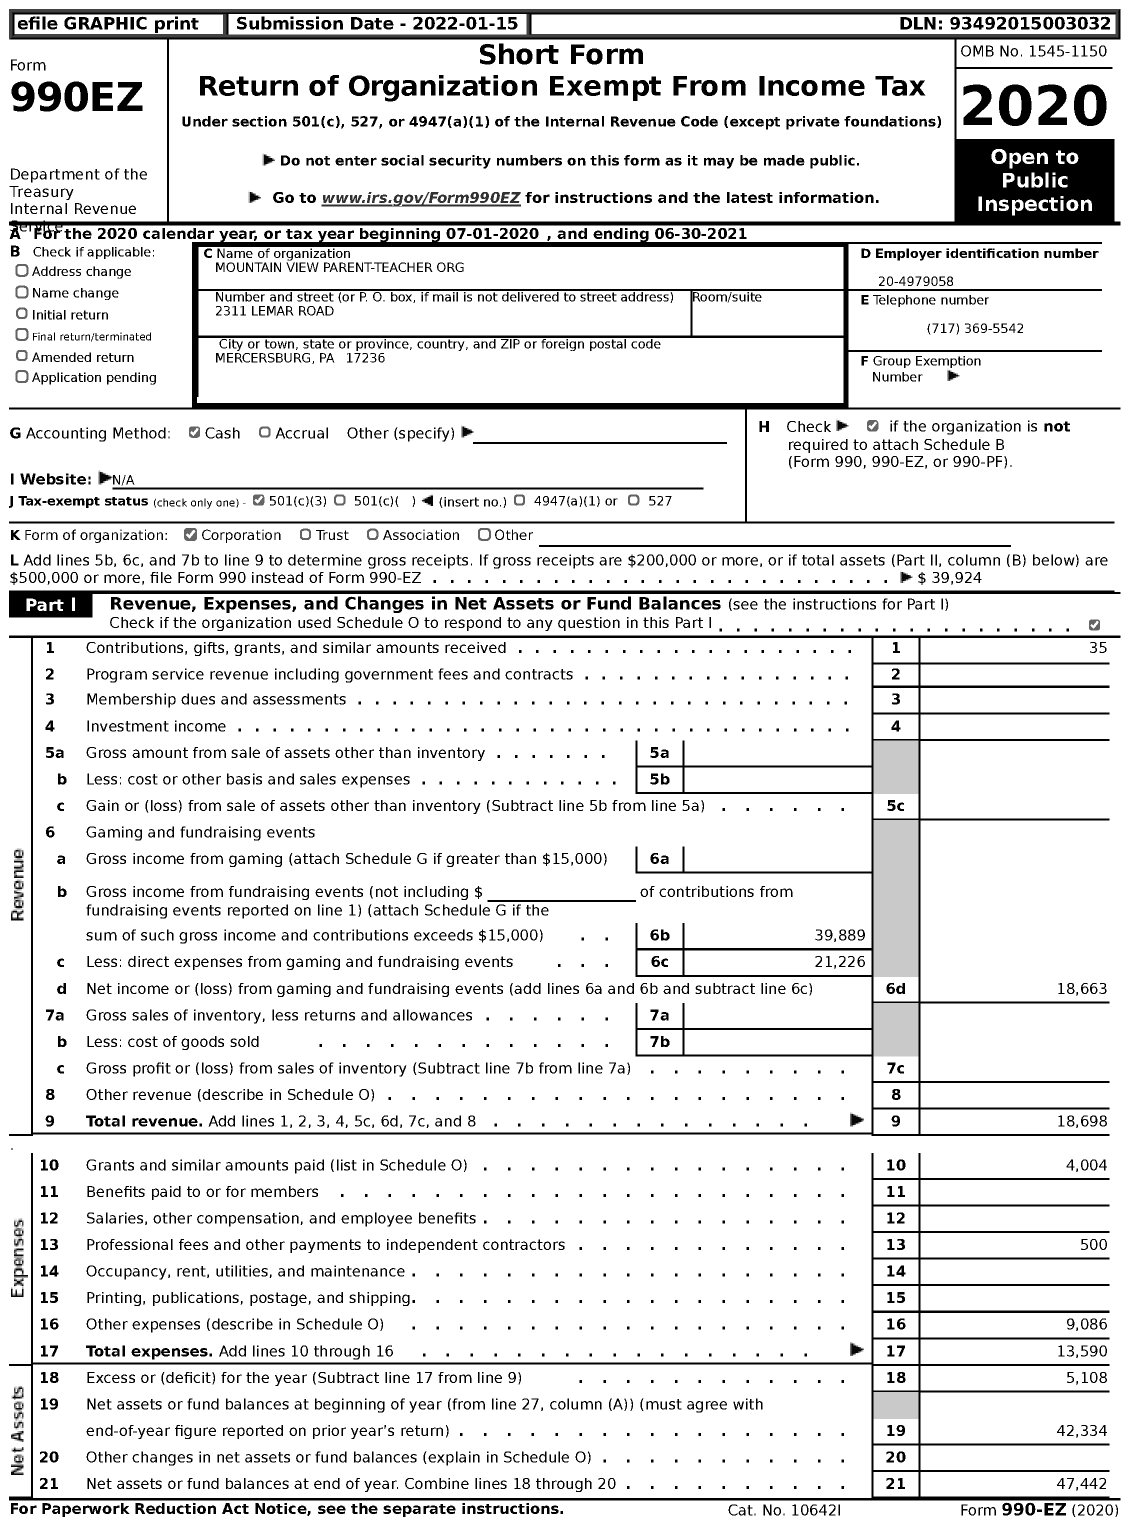 Image of first page of 2020 Form 990EZ for Mountain View Parent-Teacher Organization